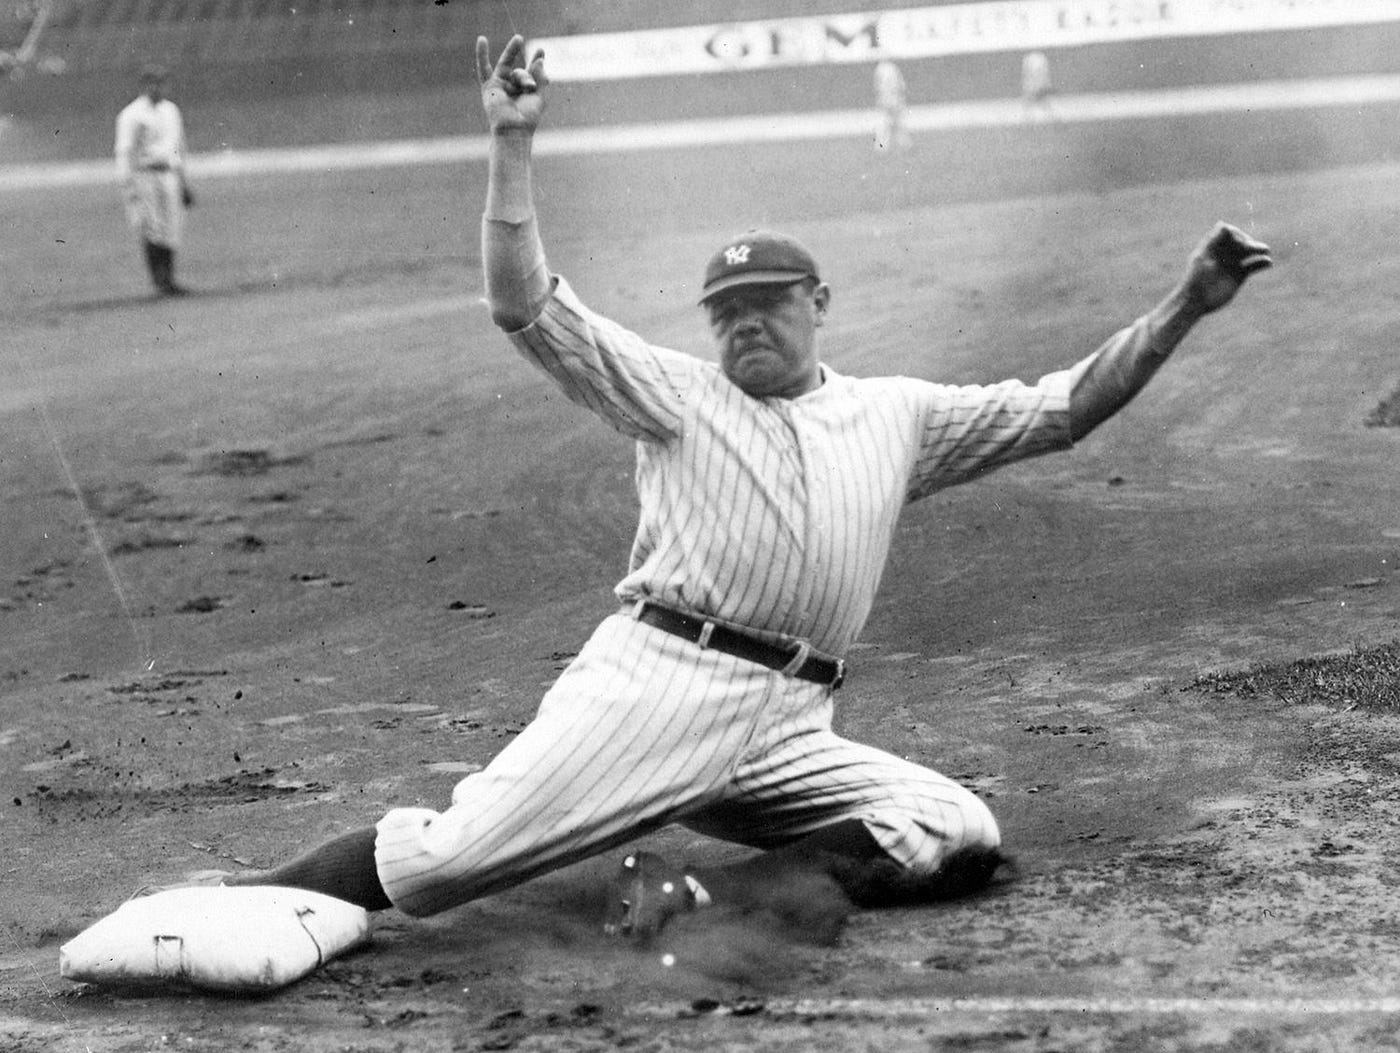 Babe Ruth's Yankees jersey sells for $286,500 at Heritage Auctions